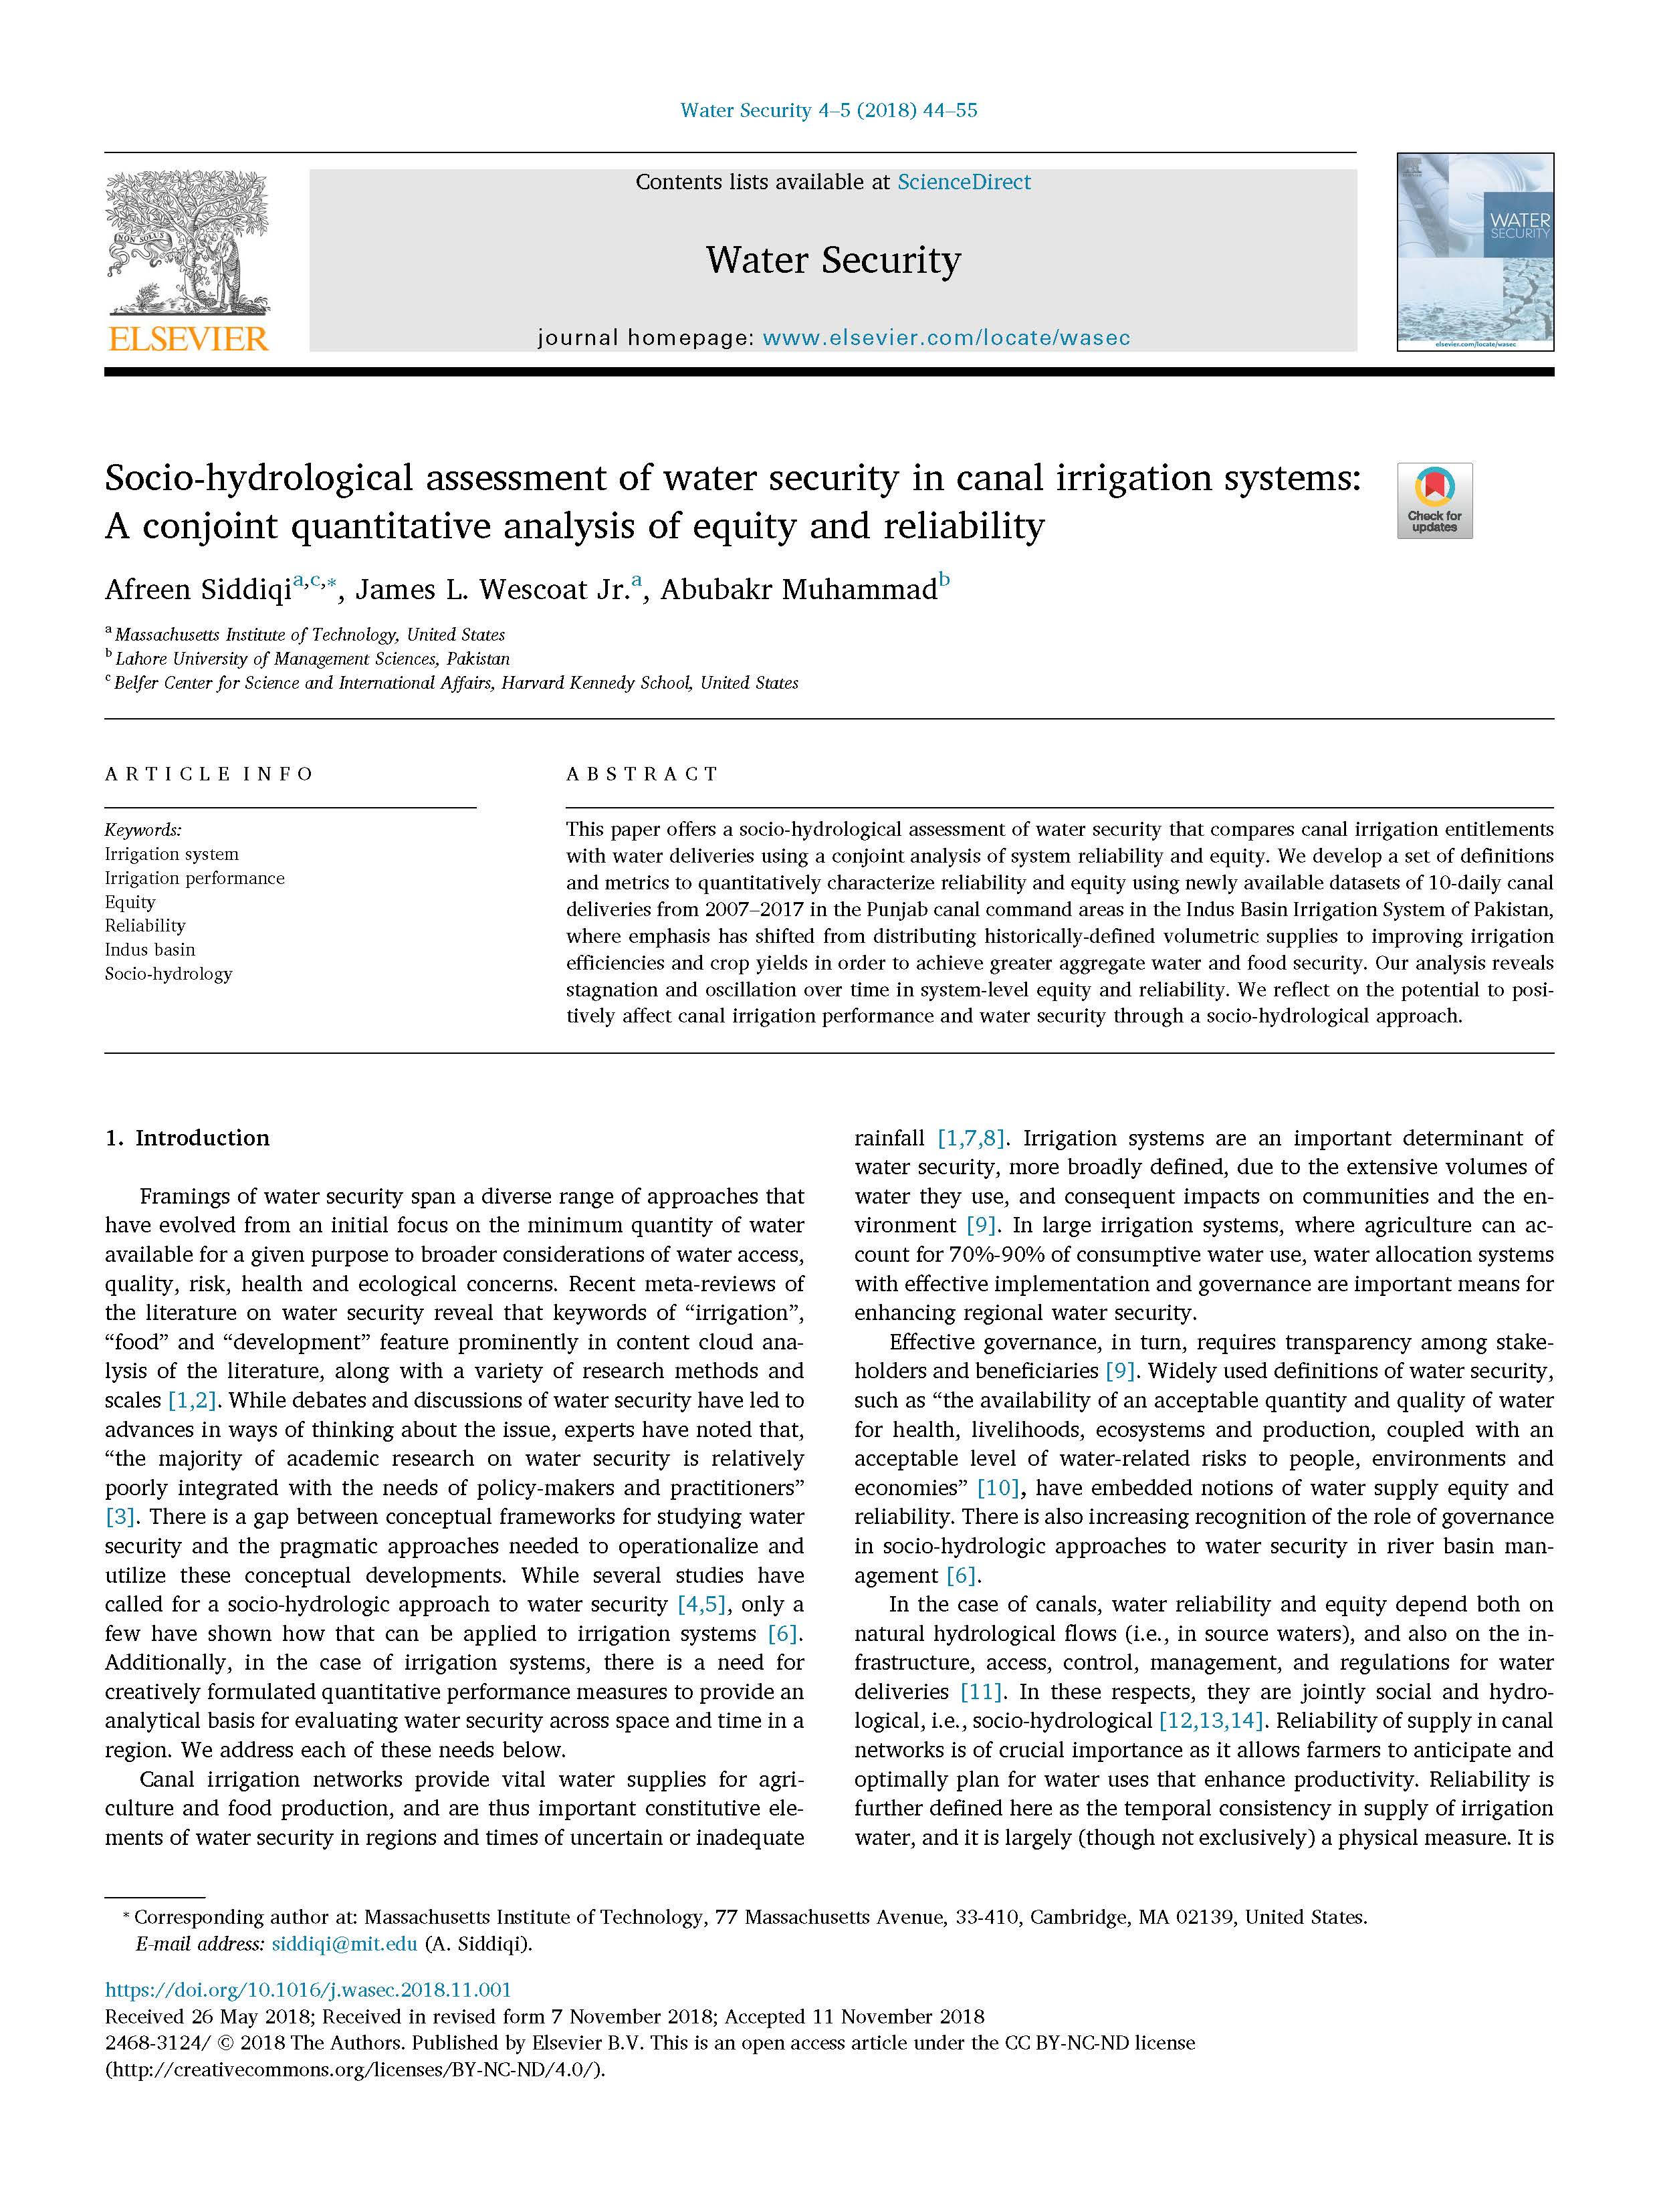 Abubakr Muhammad - <div style="text-align: justify;">This paper oﬀers a socio-hydrological assessment of water security that compares canal irrigation entitlements with water deliveries using a conjoint analysis of system reliability and equity. We develop a set of deﬁnitions and metrics to quantitatively characterize reliability and equity using newly available datasets of 10-daily canal deliveries from 2007–2017 in the Punjab canal command areas in the Indus Basin Irrigation System of Pakistan,where emphasis has shifted from distributing historically-deﬁned volumetric supplies to improving irrigation eﬃciencies and crop yields in order to achieve greater aggregate water and food security. Our analysis reveals stagnation and oscillation over time in system-level equity and reliability. We reﬂect on the potential to posi-tively aﬀect canal irrigation performance and water security through a socio-hydrological approach.</div><div style="text-align: justify;"><br></div><div style="text-align: justify;"><span style="font-weight: bold;">Keywords: Irrigation system, irrigation performance, equity, reliability, Indus basin, socio-hydrology</span></div>